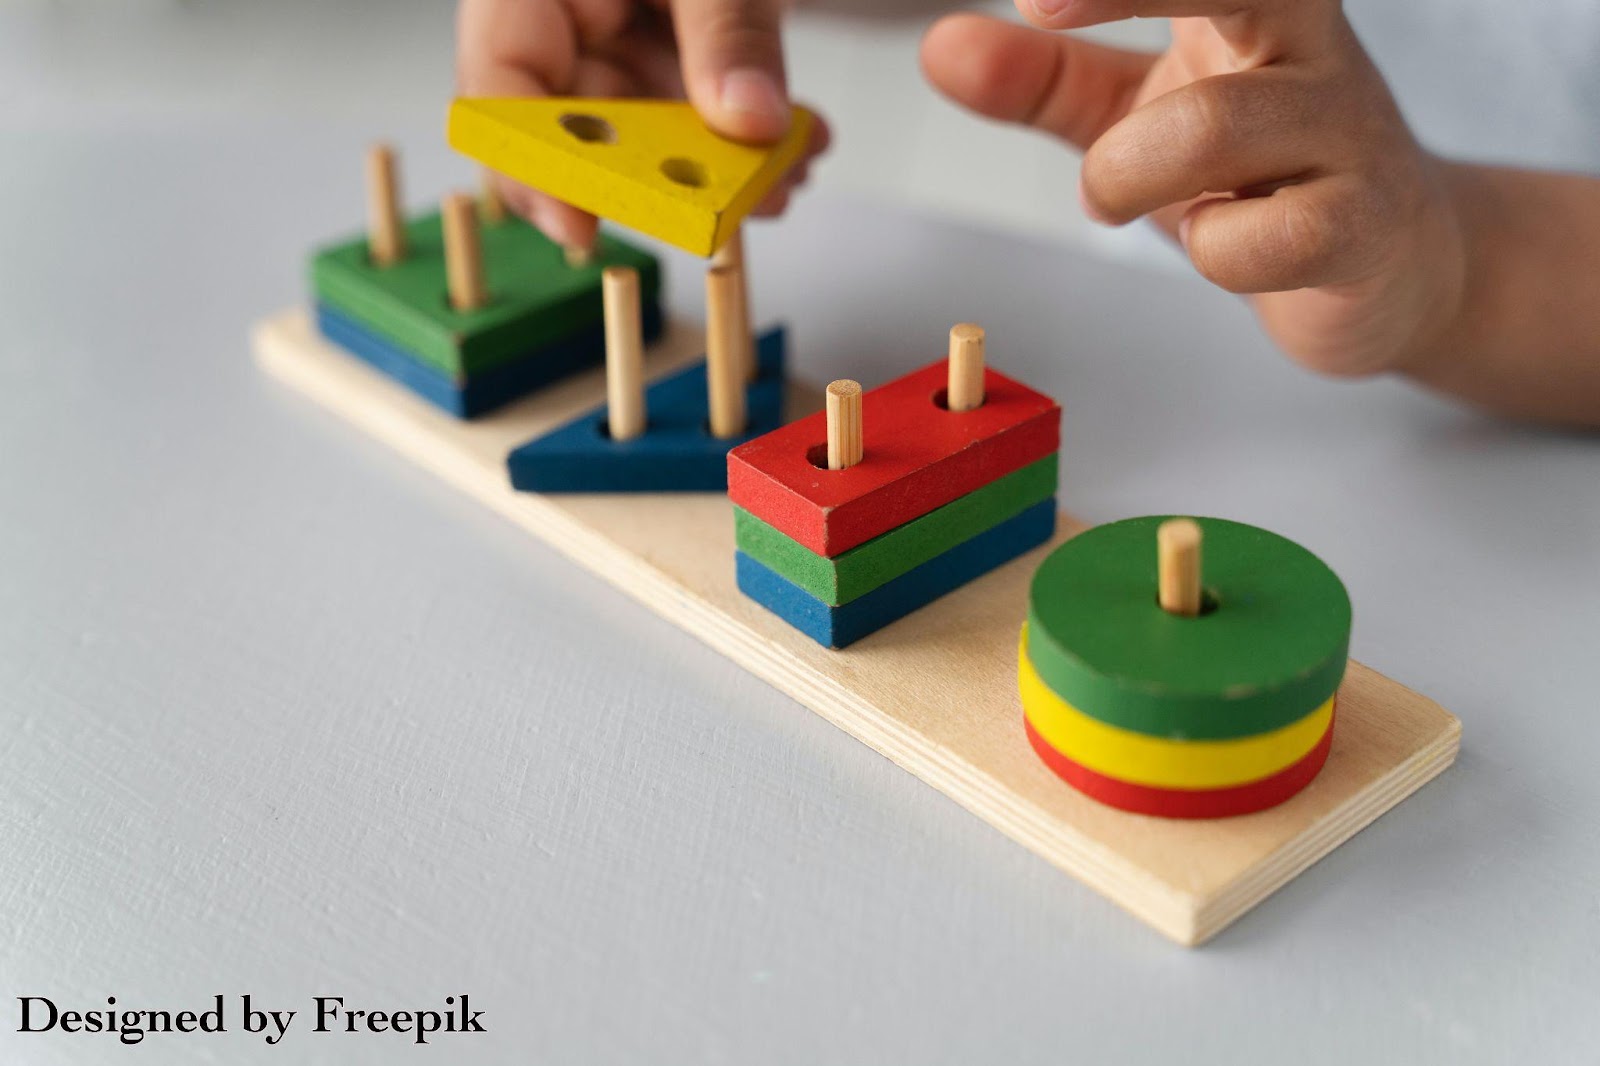 toddler hands playing with a wooden toy